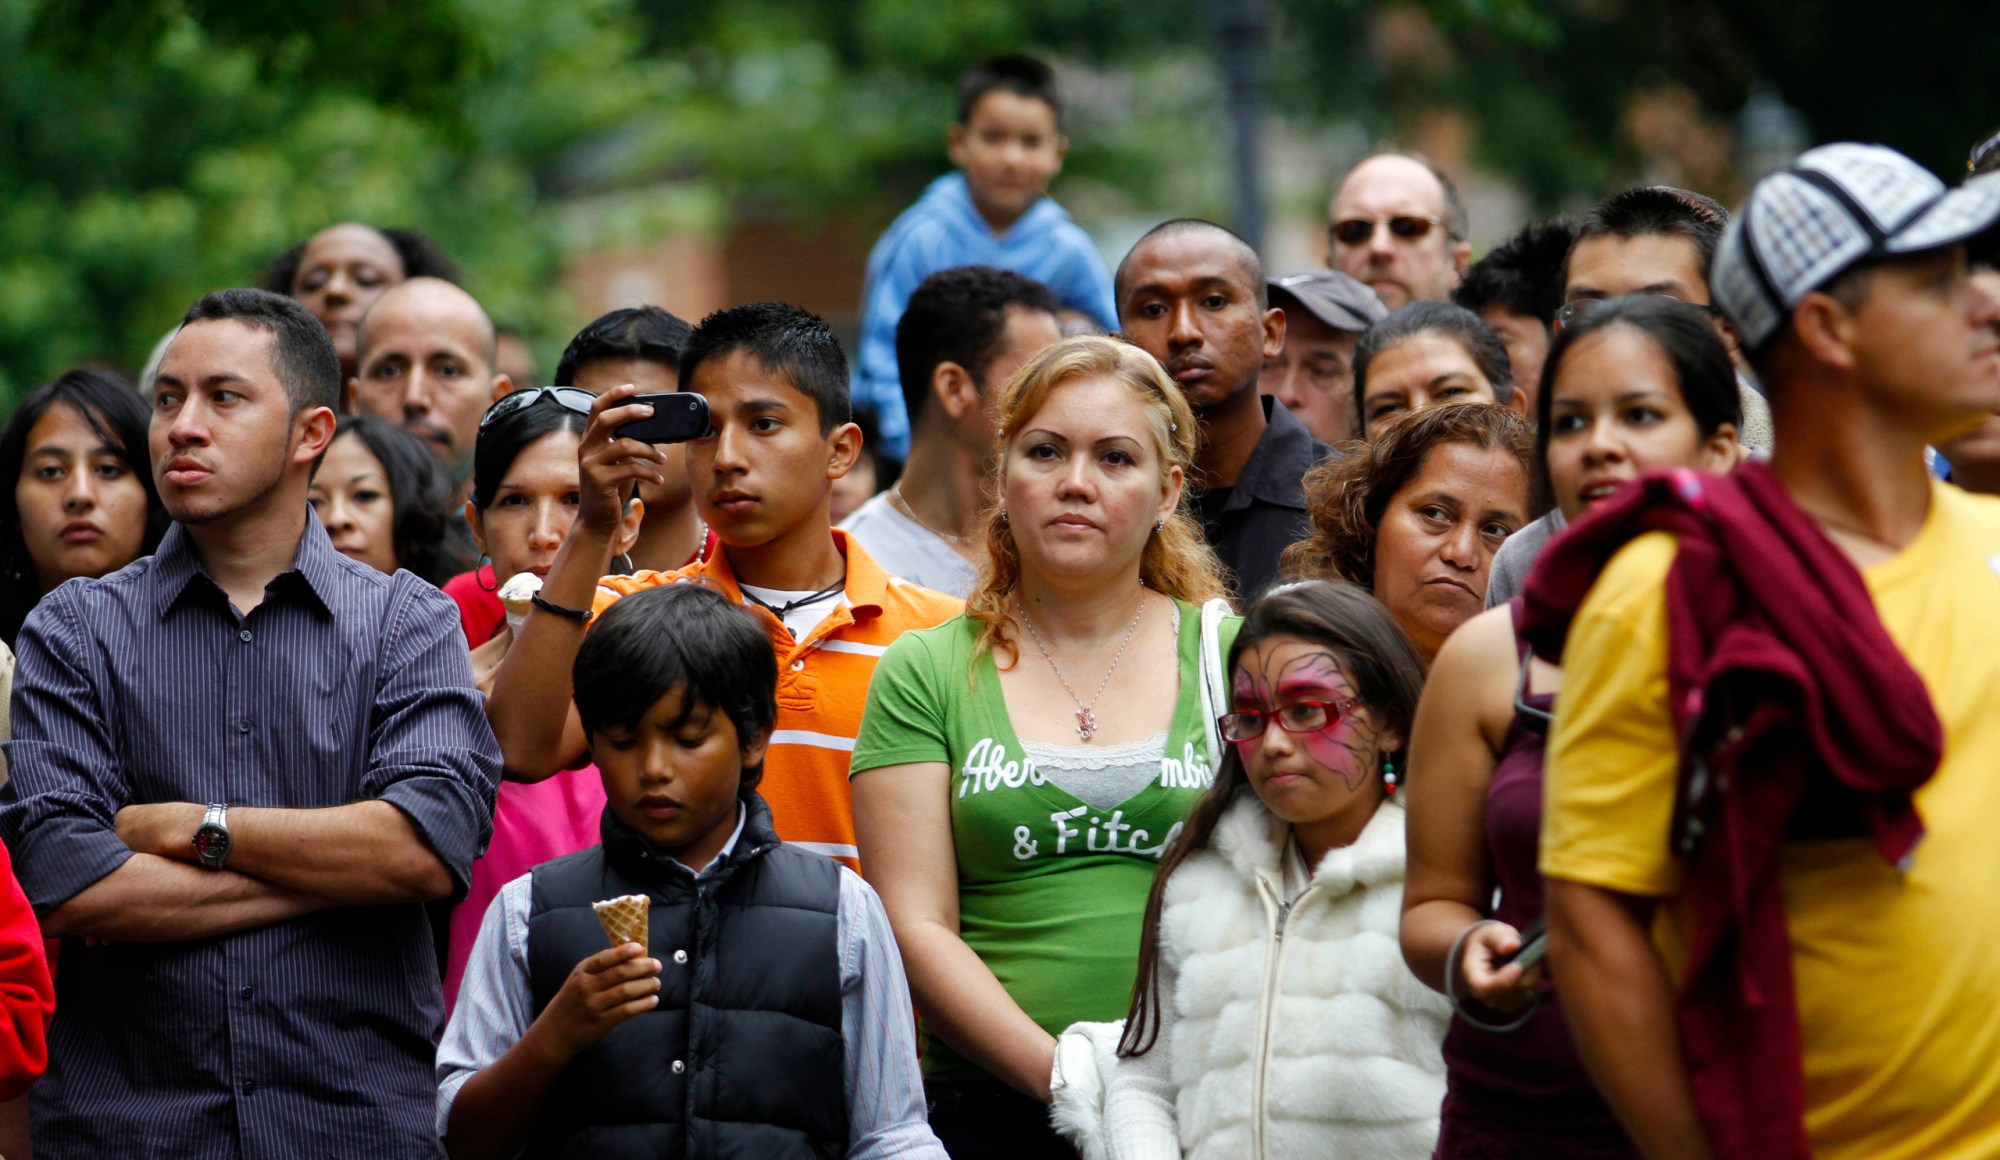 Spectators watch a musical performance at the Fiesta del Pueblo festival in Raleigh, North Carolina. (AP/Jim R. Bounds)